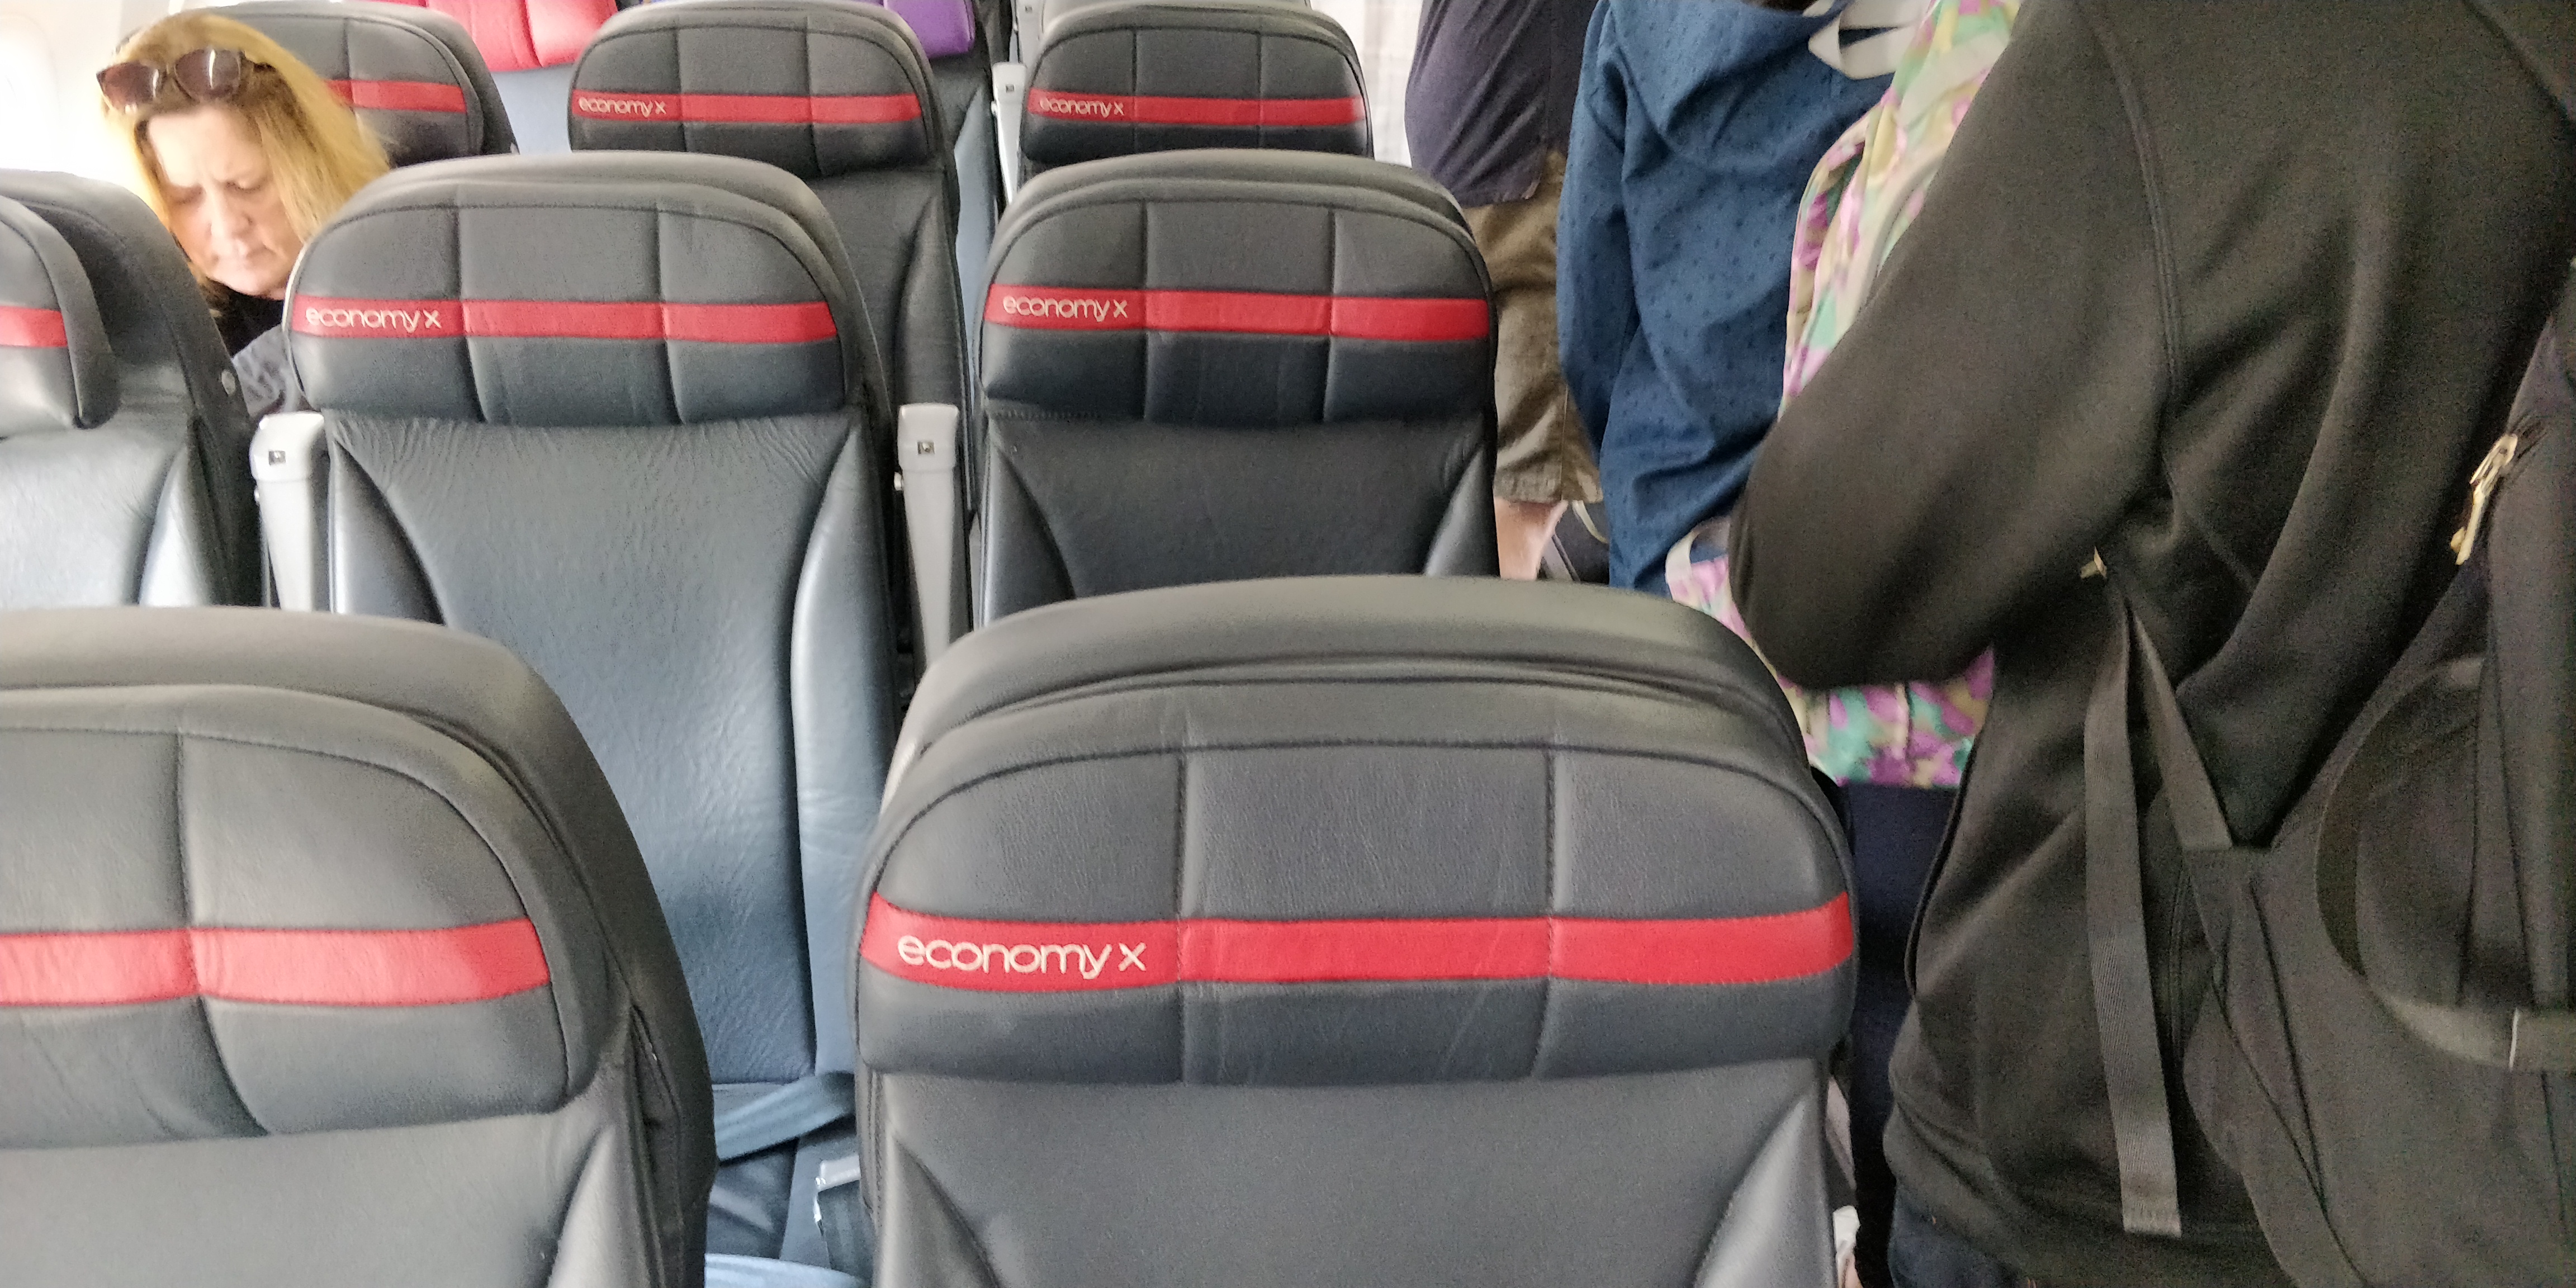 A PICTURE OF VIRGIN'S 737 ECONOMY X CABIN